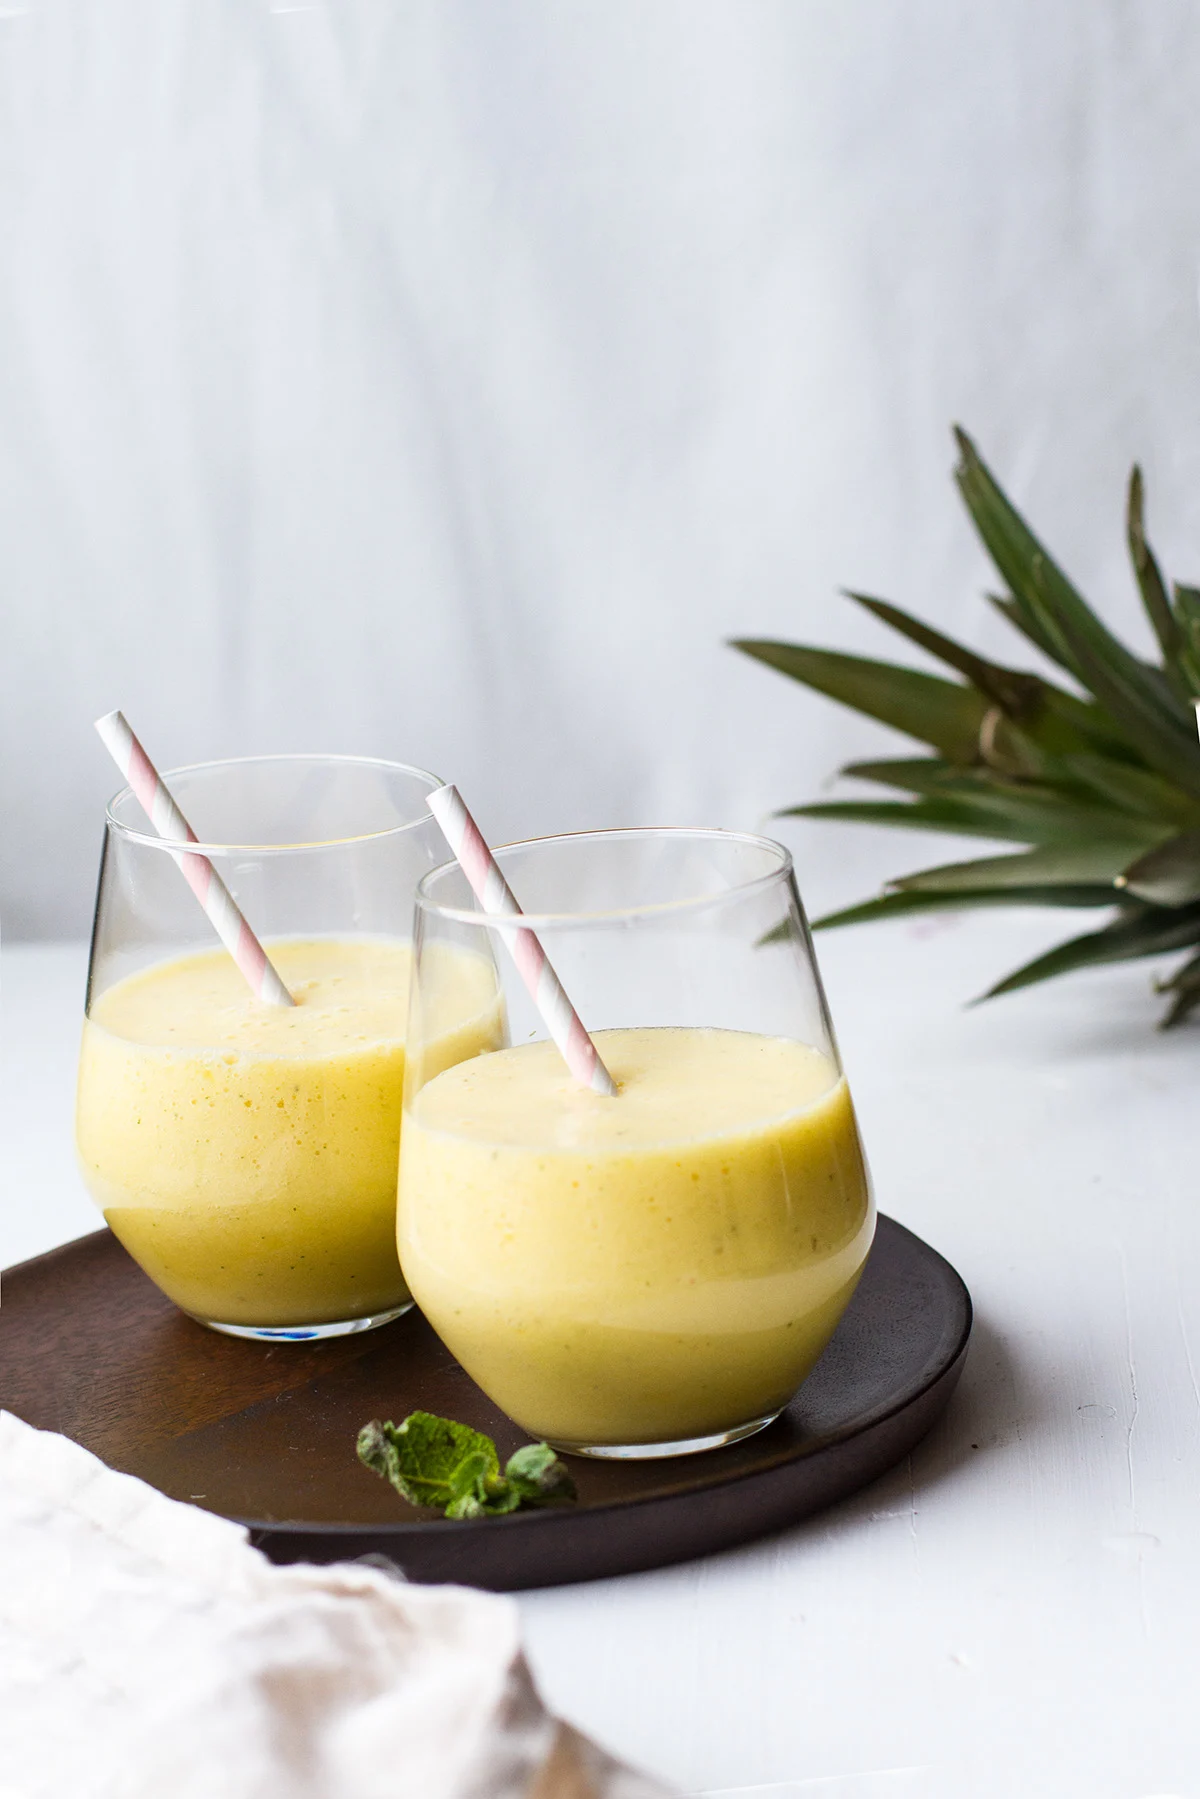 Two glasses with a yellow smoothie on a wooden plate.